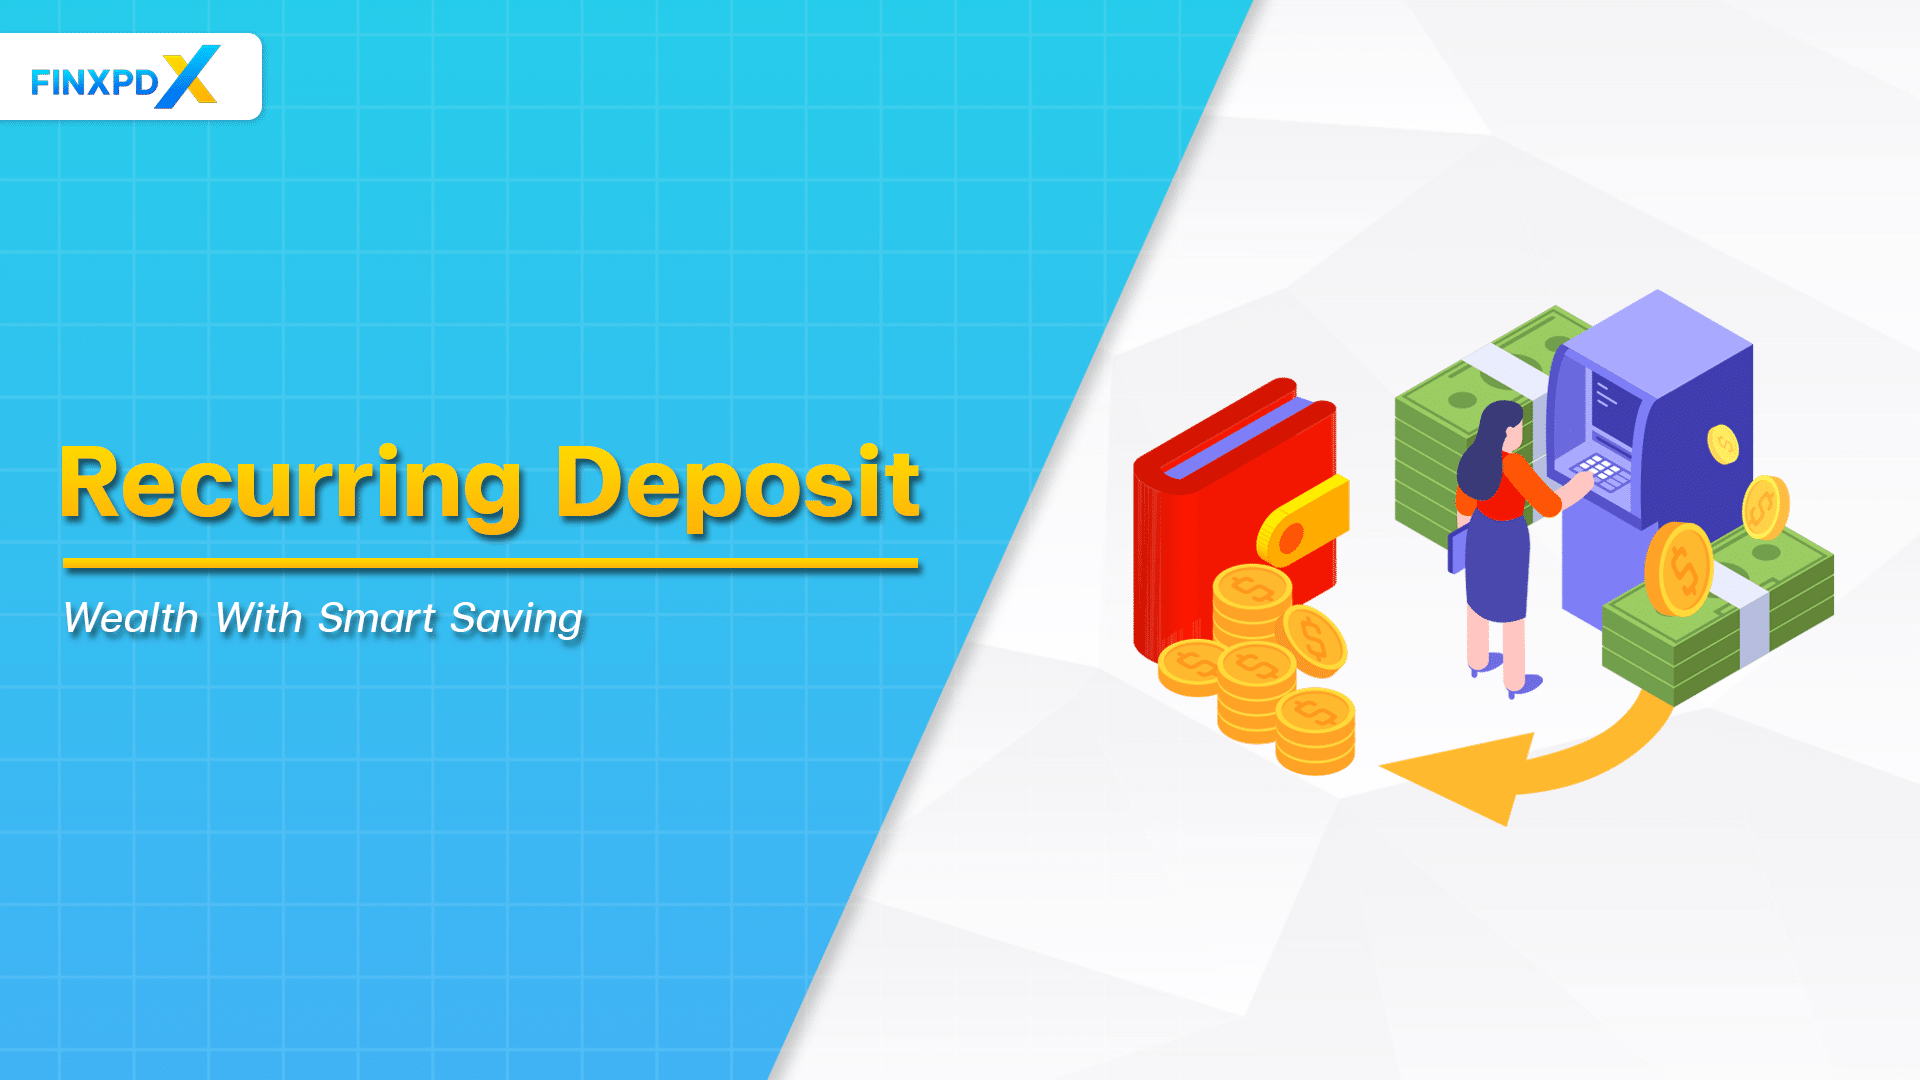 A step-by-step guide on opening a recurring deposit account.